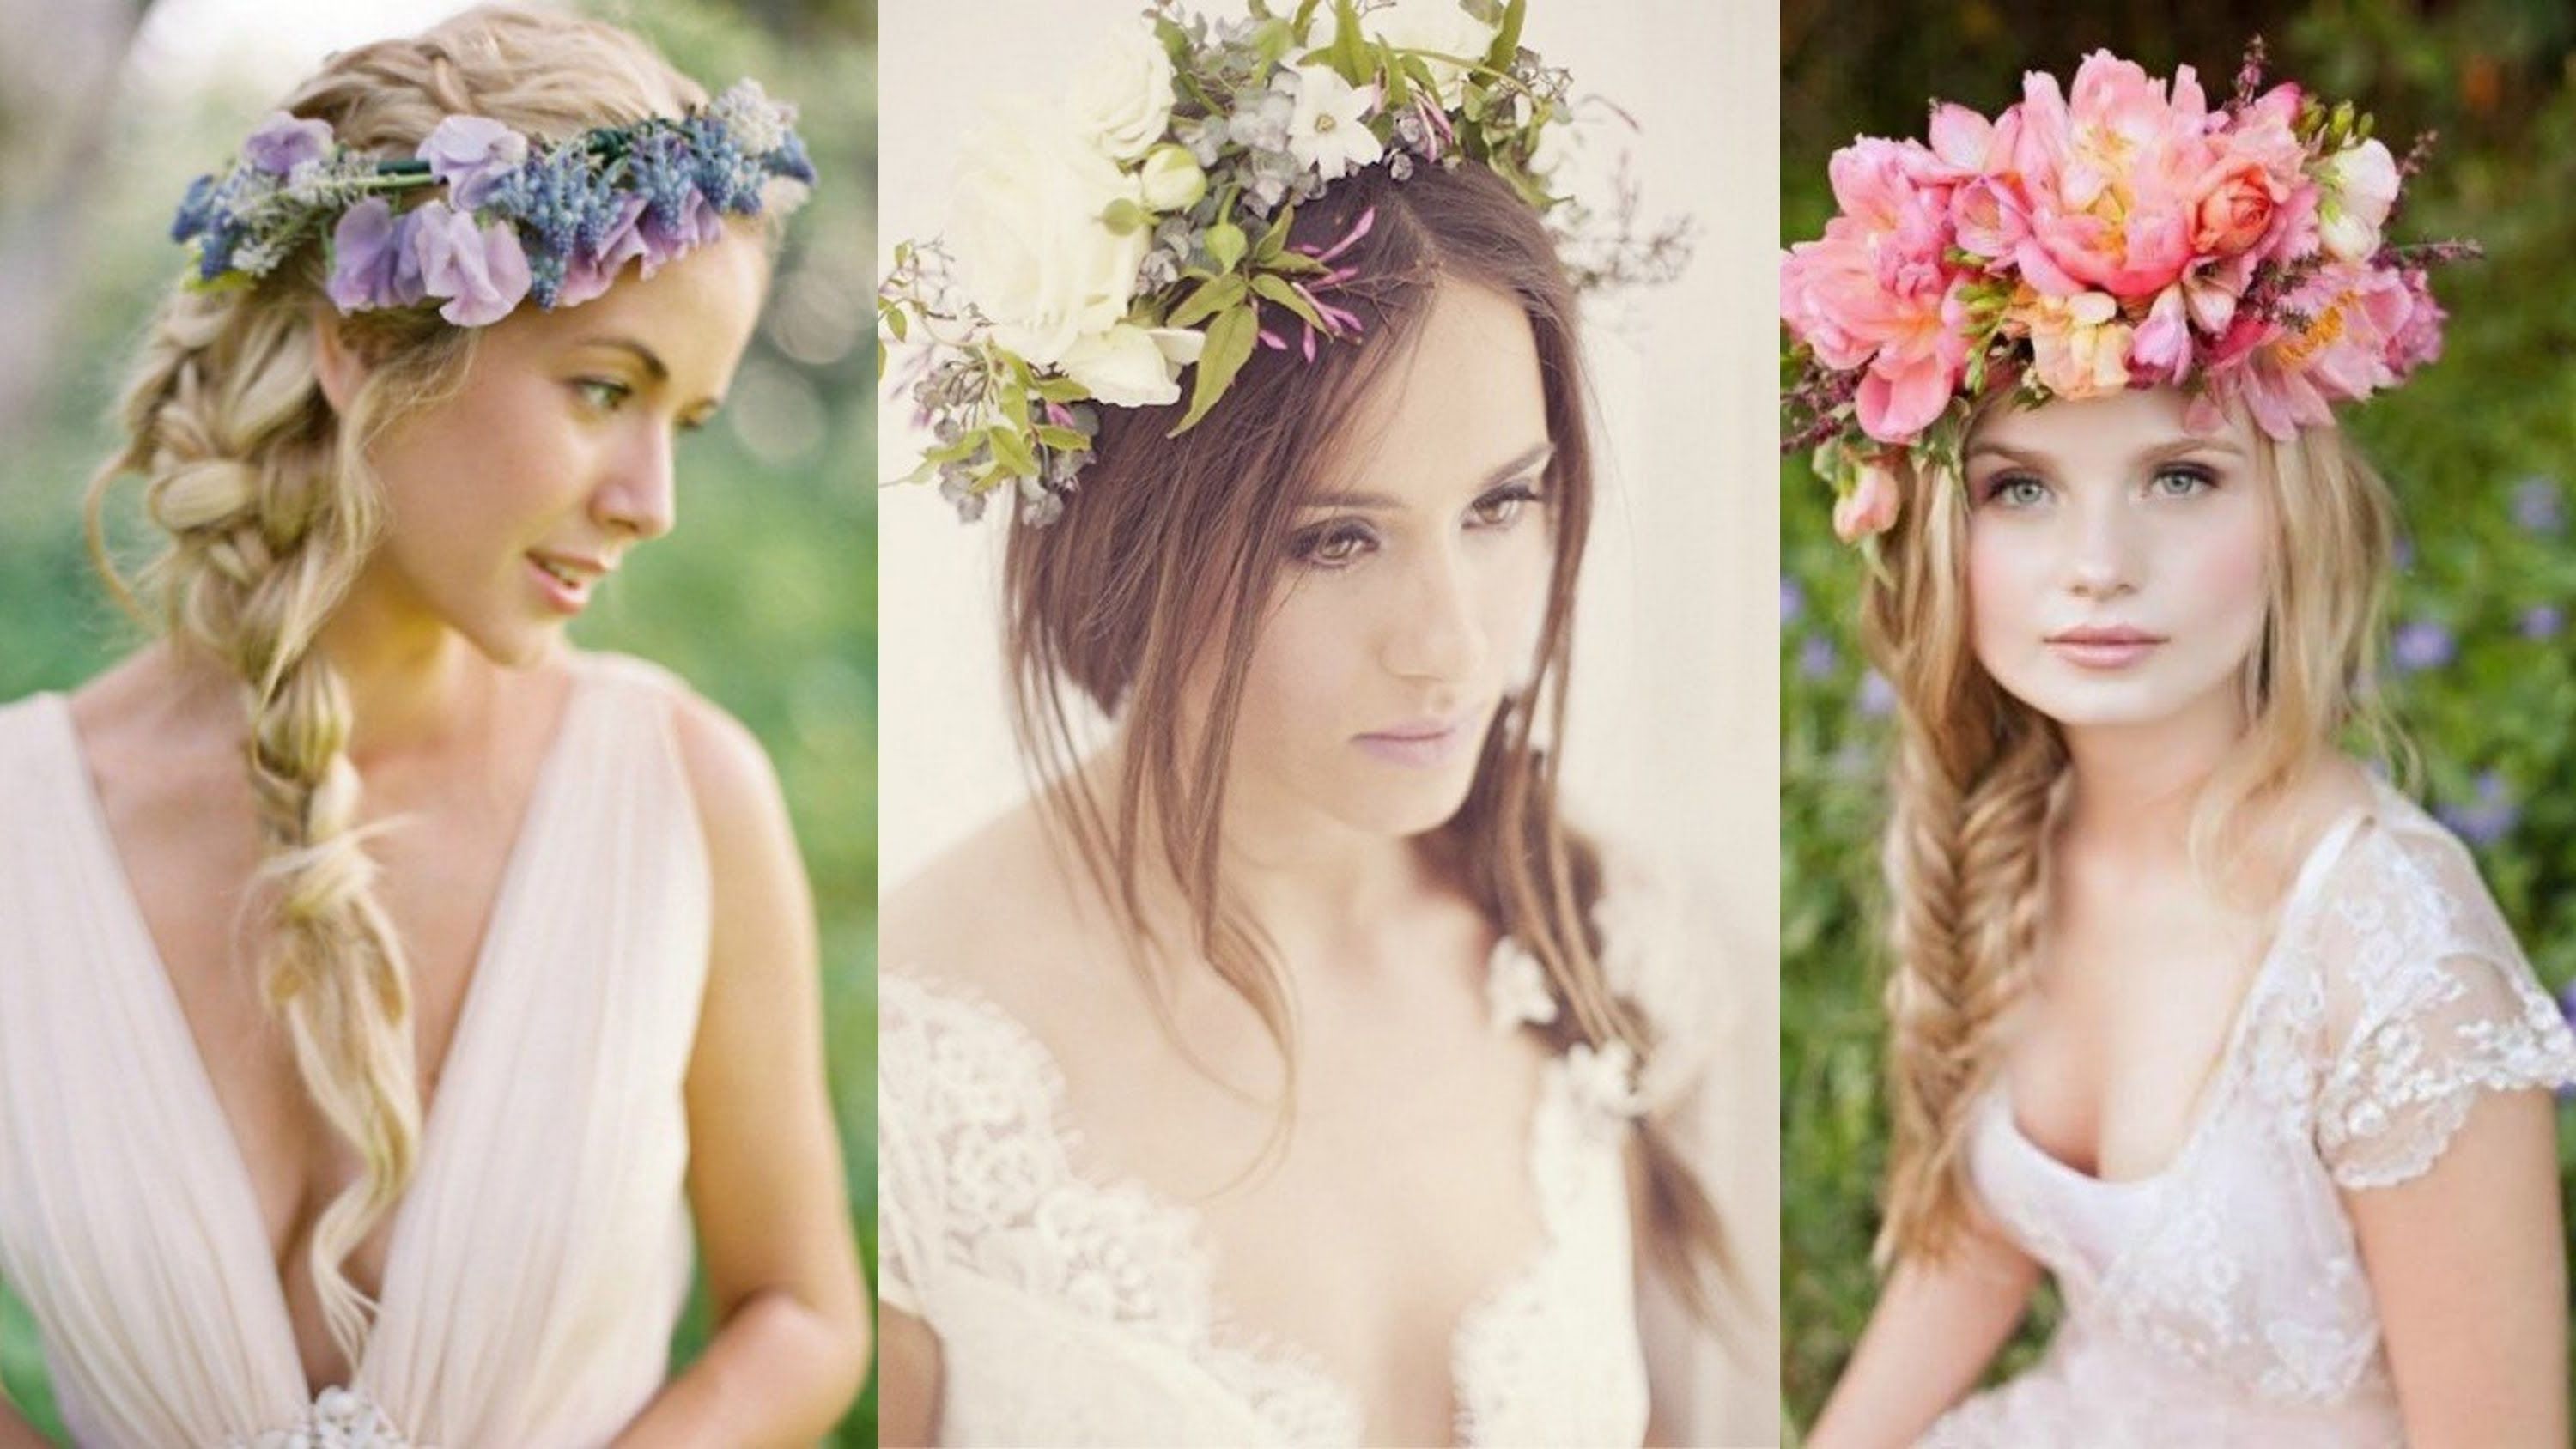 Braided Wedding Hairstyles With Flowers – Youtube Intended For Most Recently Released Wedding Hairstyles With Flowers (View 8 of 15)